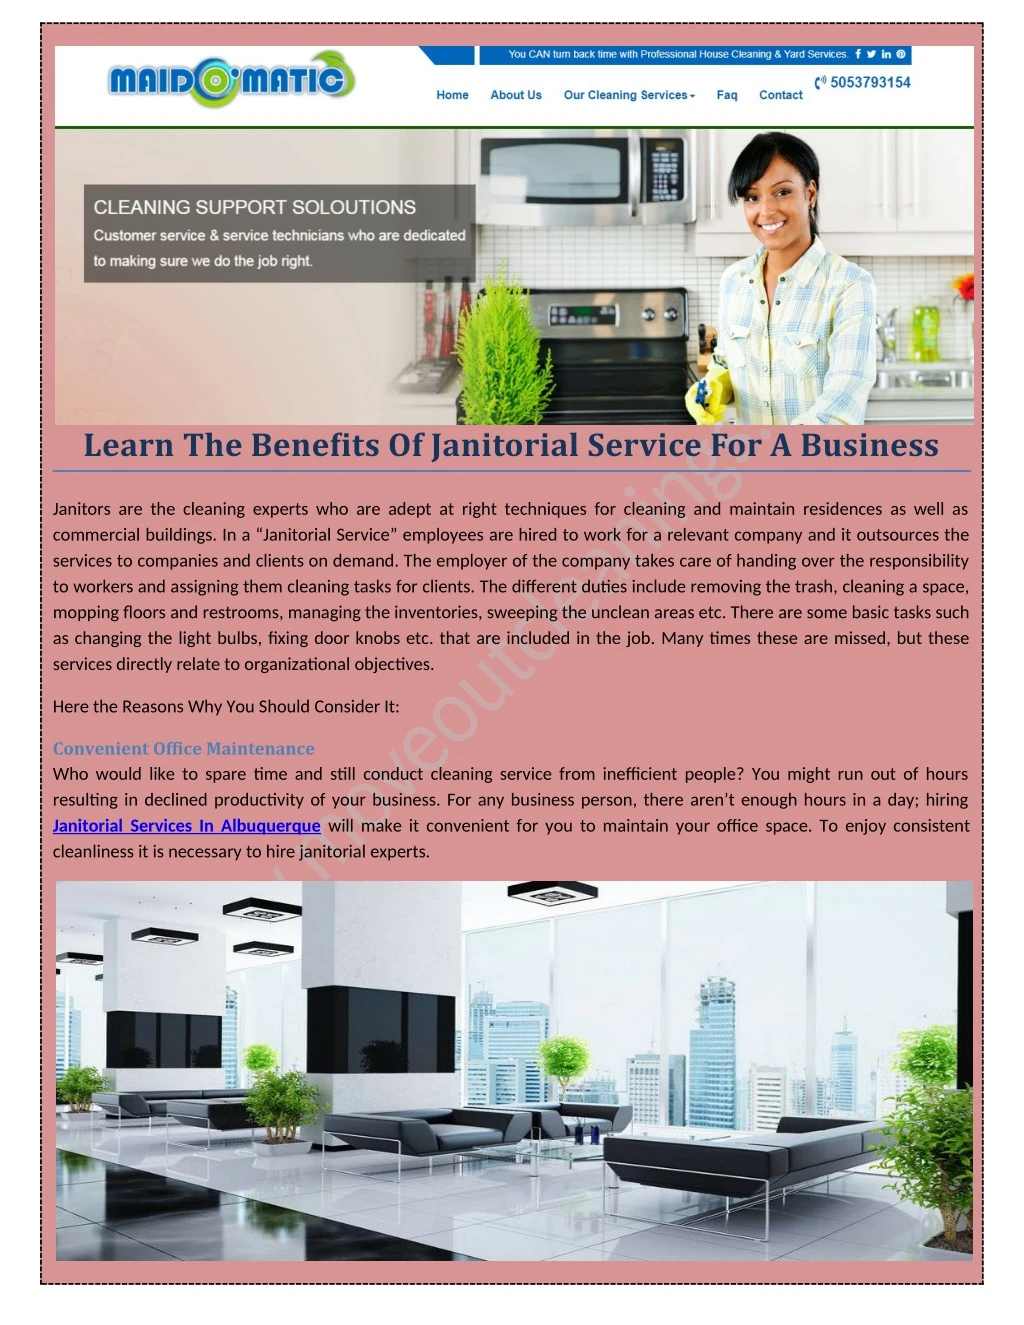 learn the benefits of janitorial service